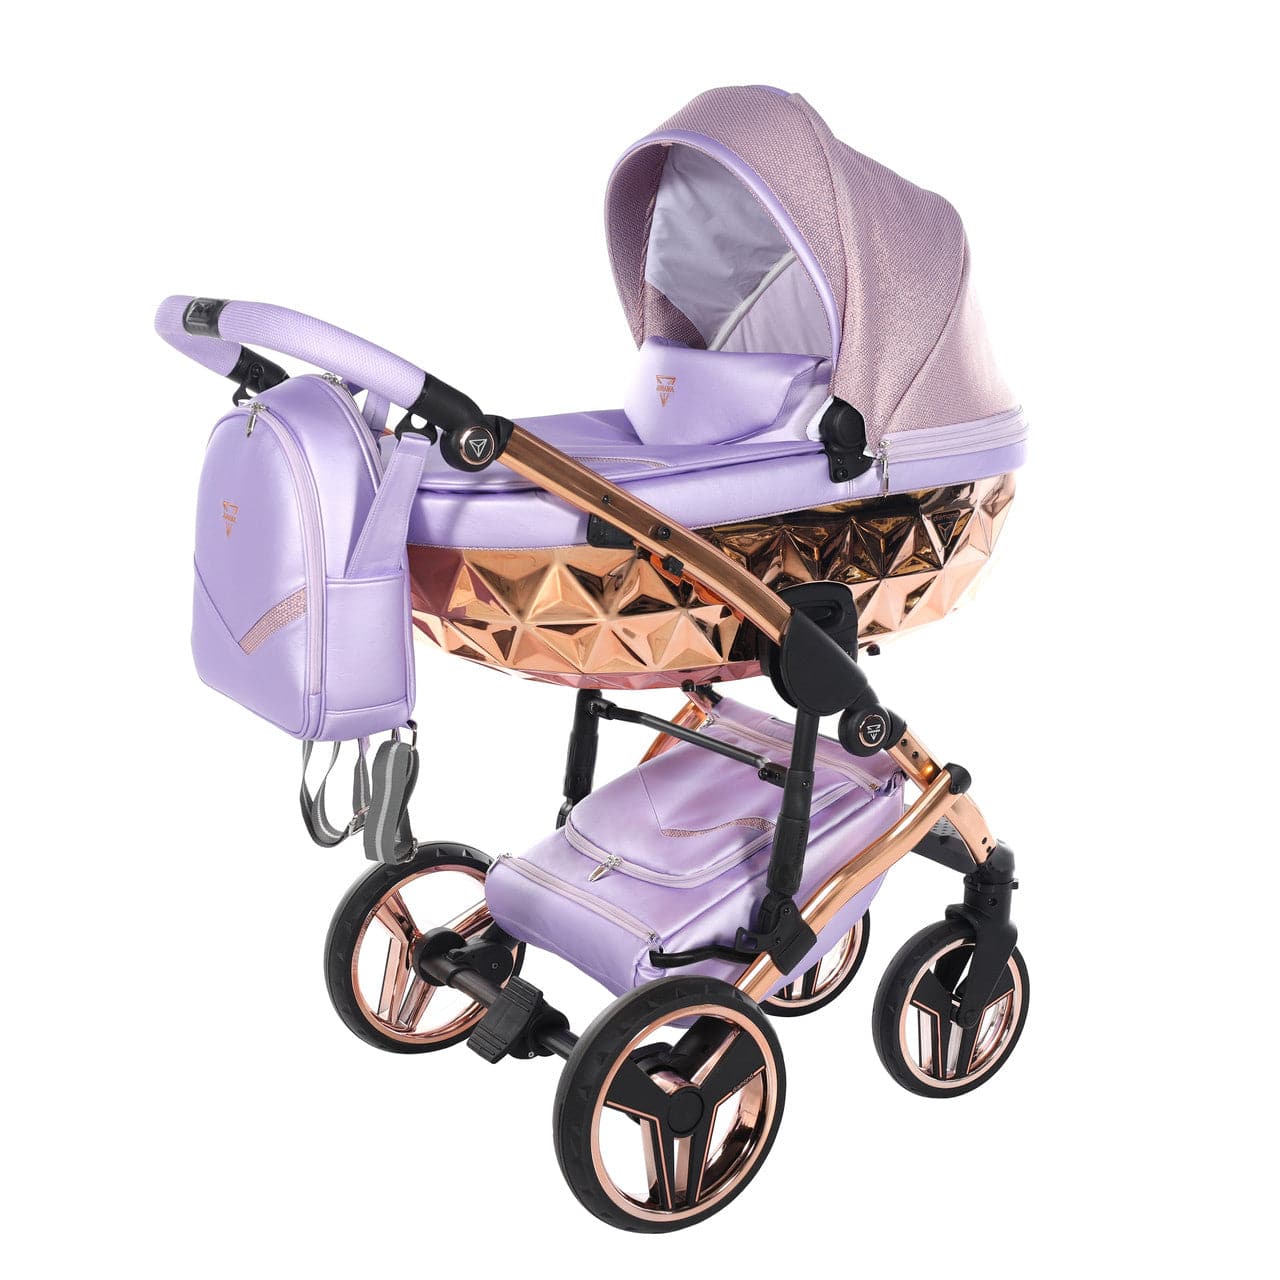 Junama Dolce 2 In 1 Pram - Lilac / Rose Gold - For Your Little One